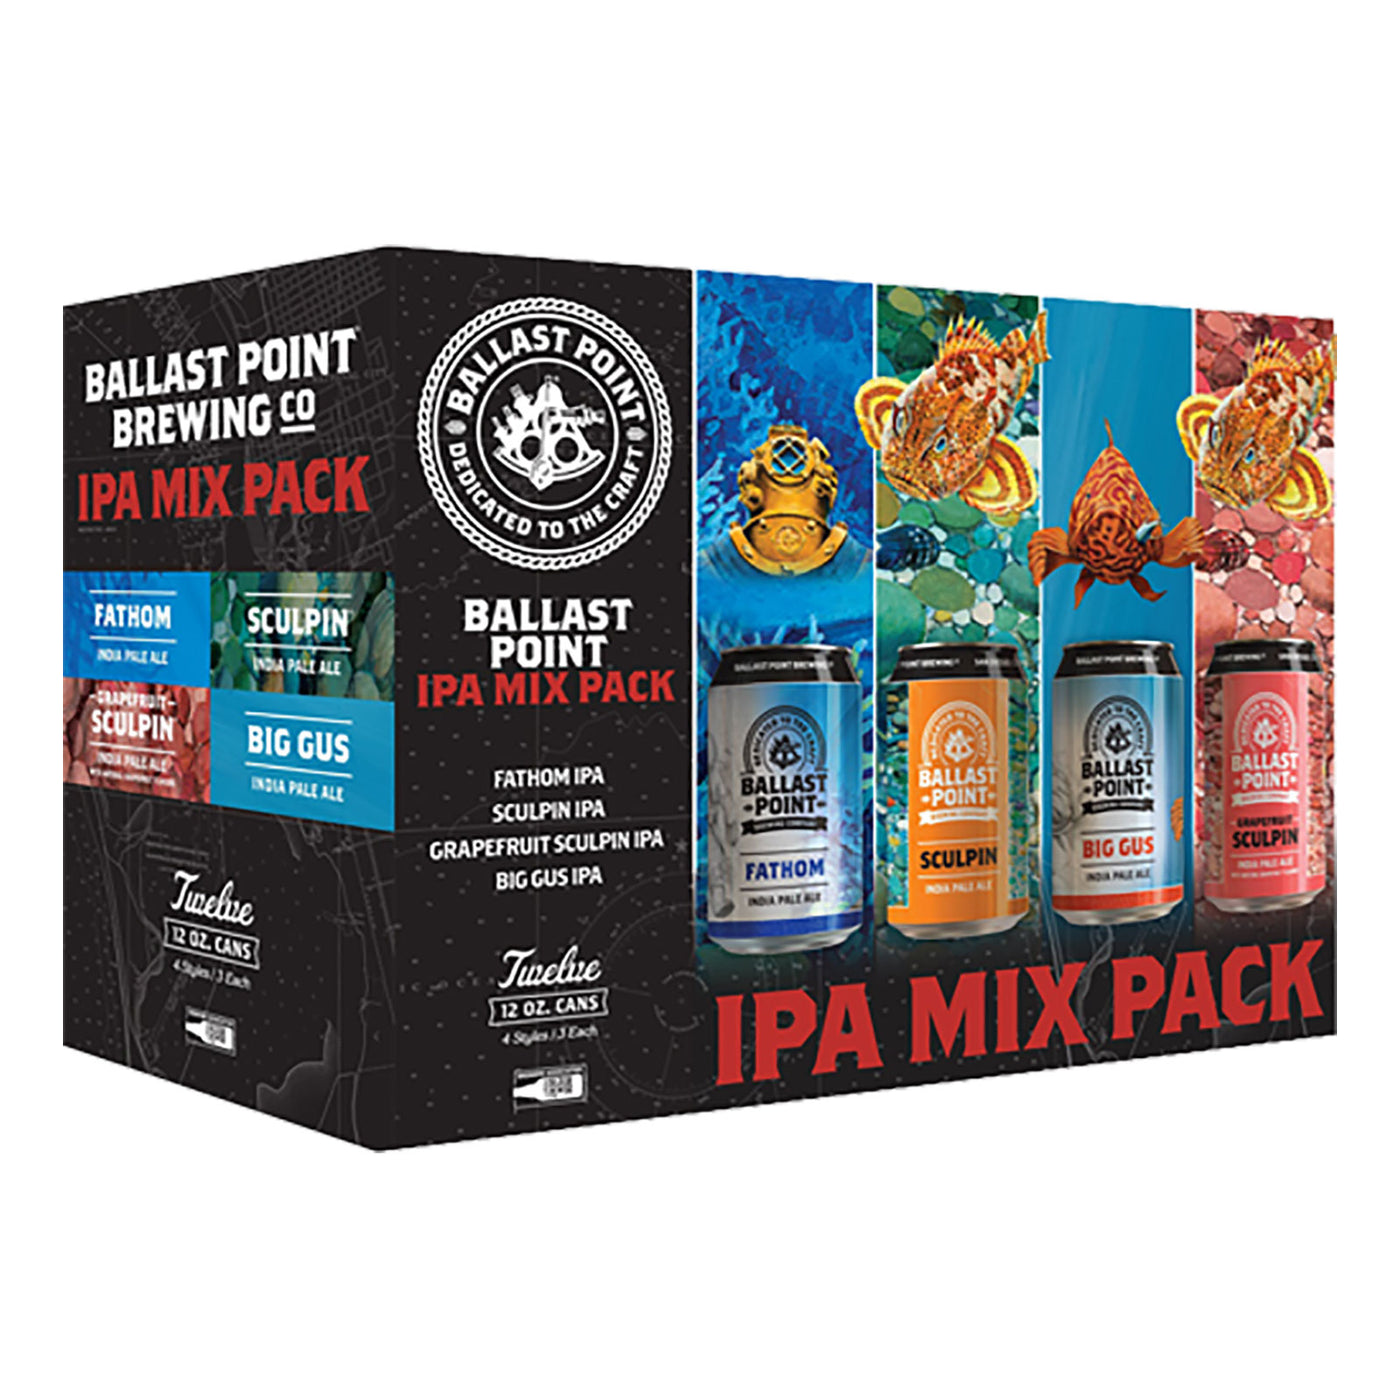 Ballast Point IPA Mix Pack